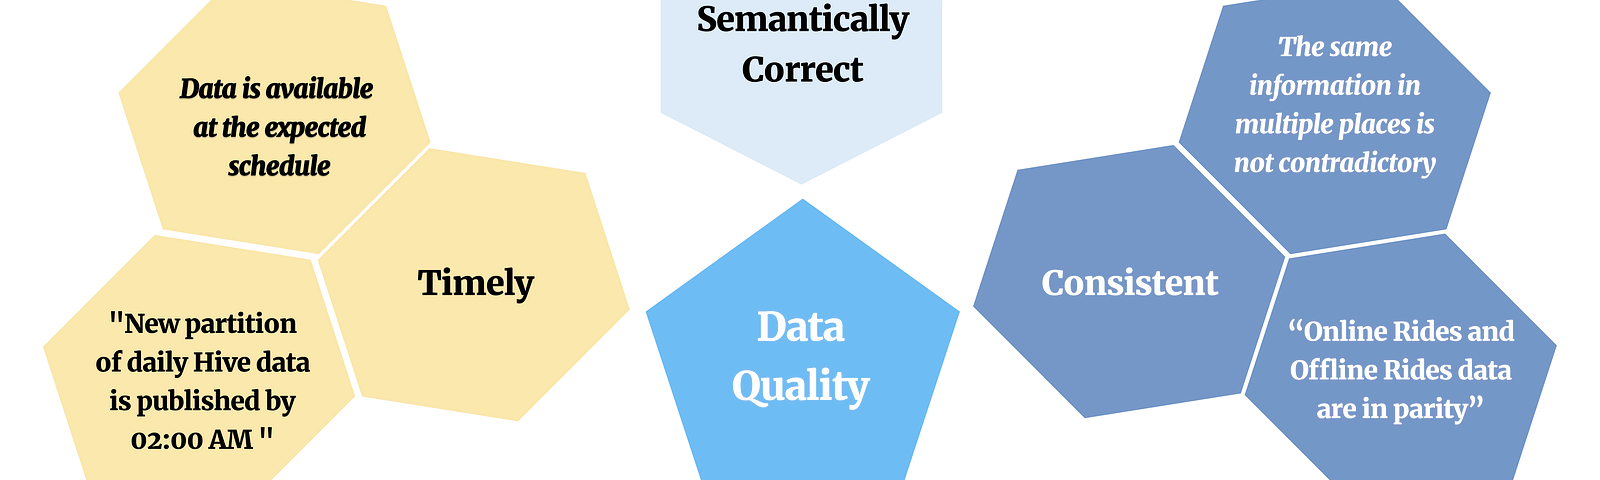 Five aspects of data quality — semantic correctness, consistent, complete/unique, well-formed, timely